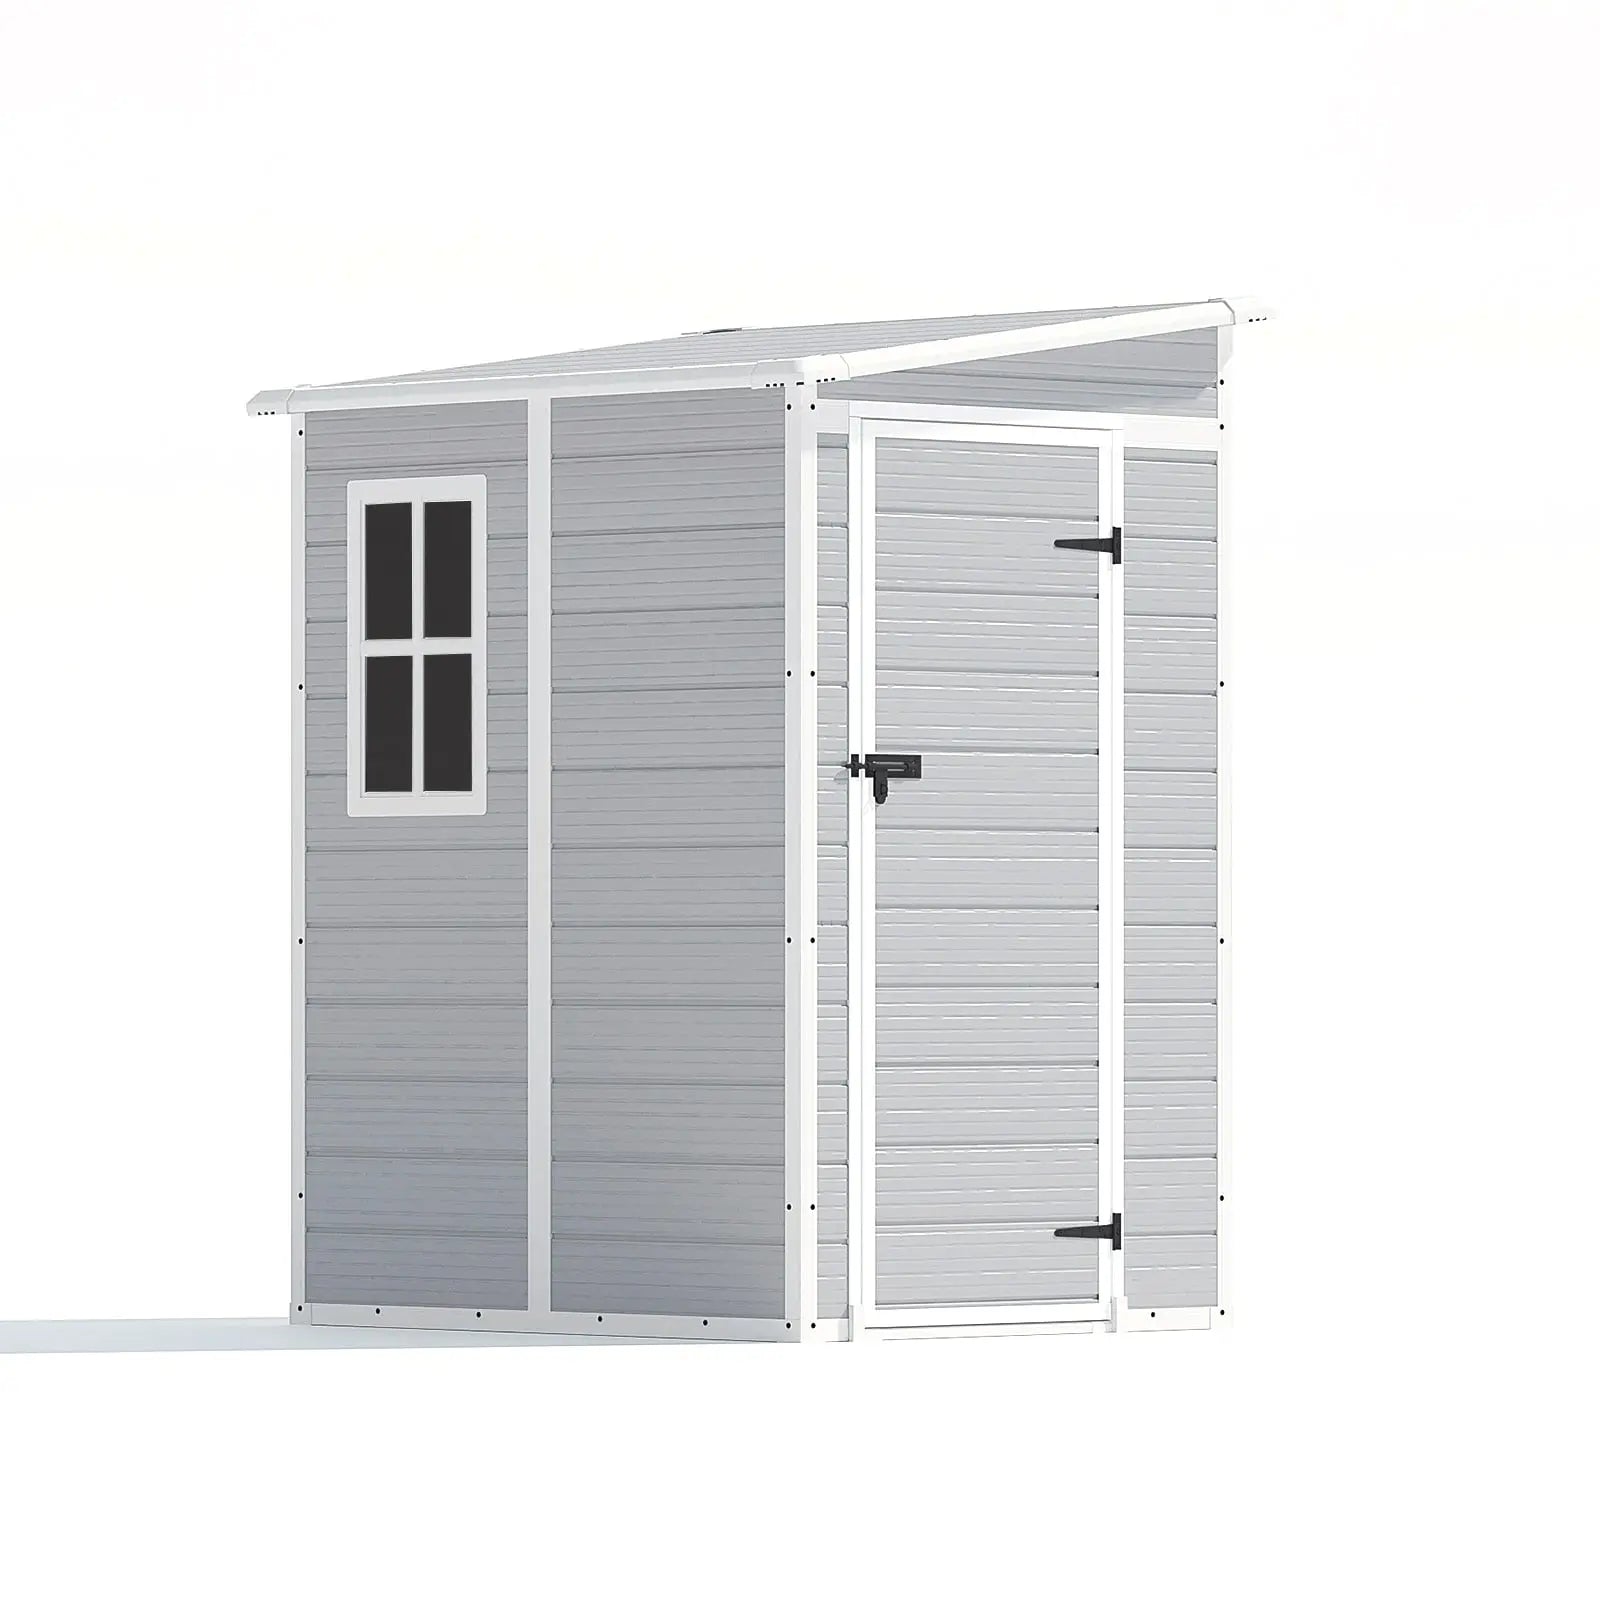 Patiowell 5x4 Plastic Shed-1